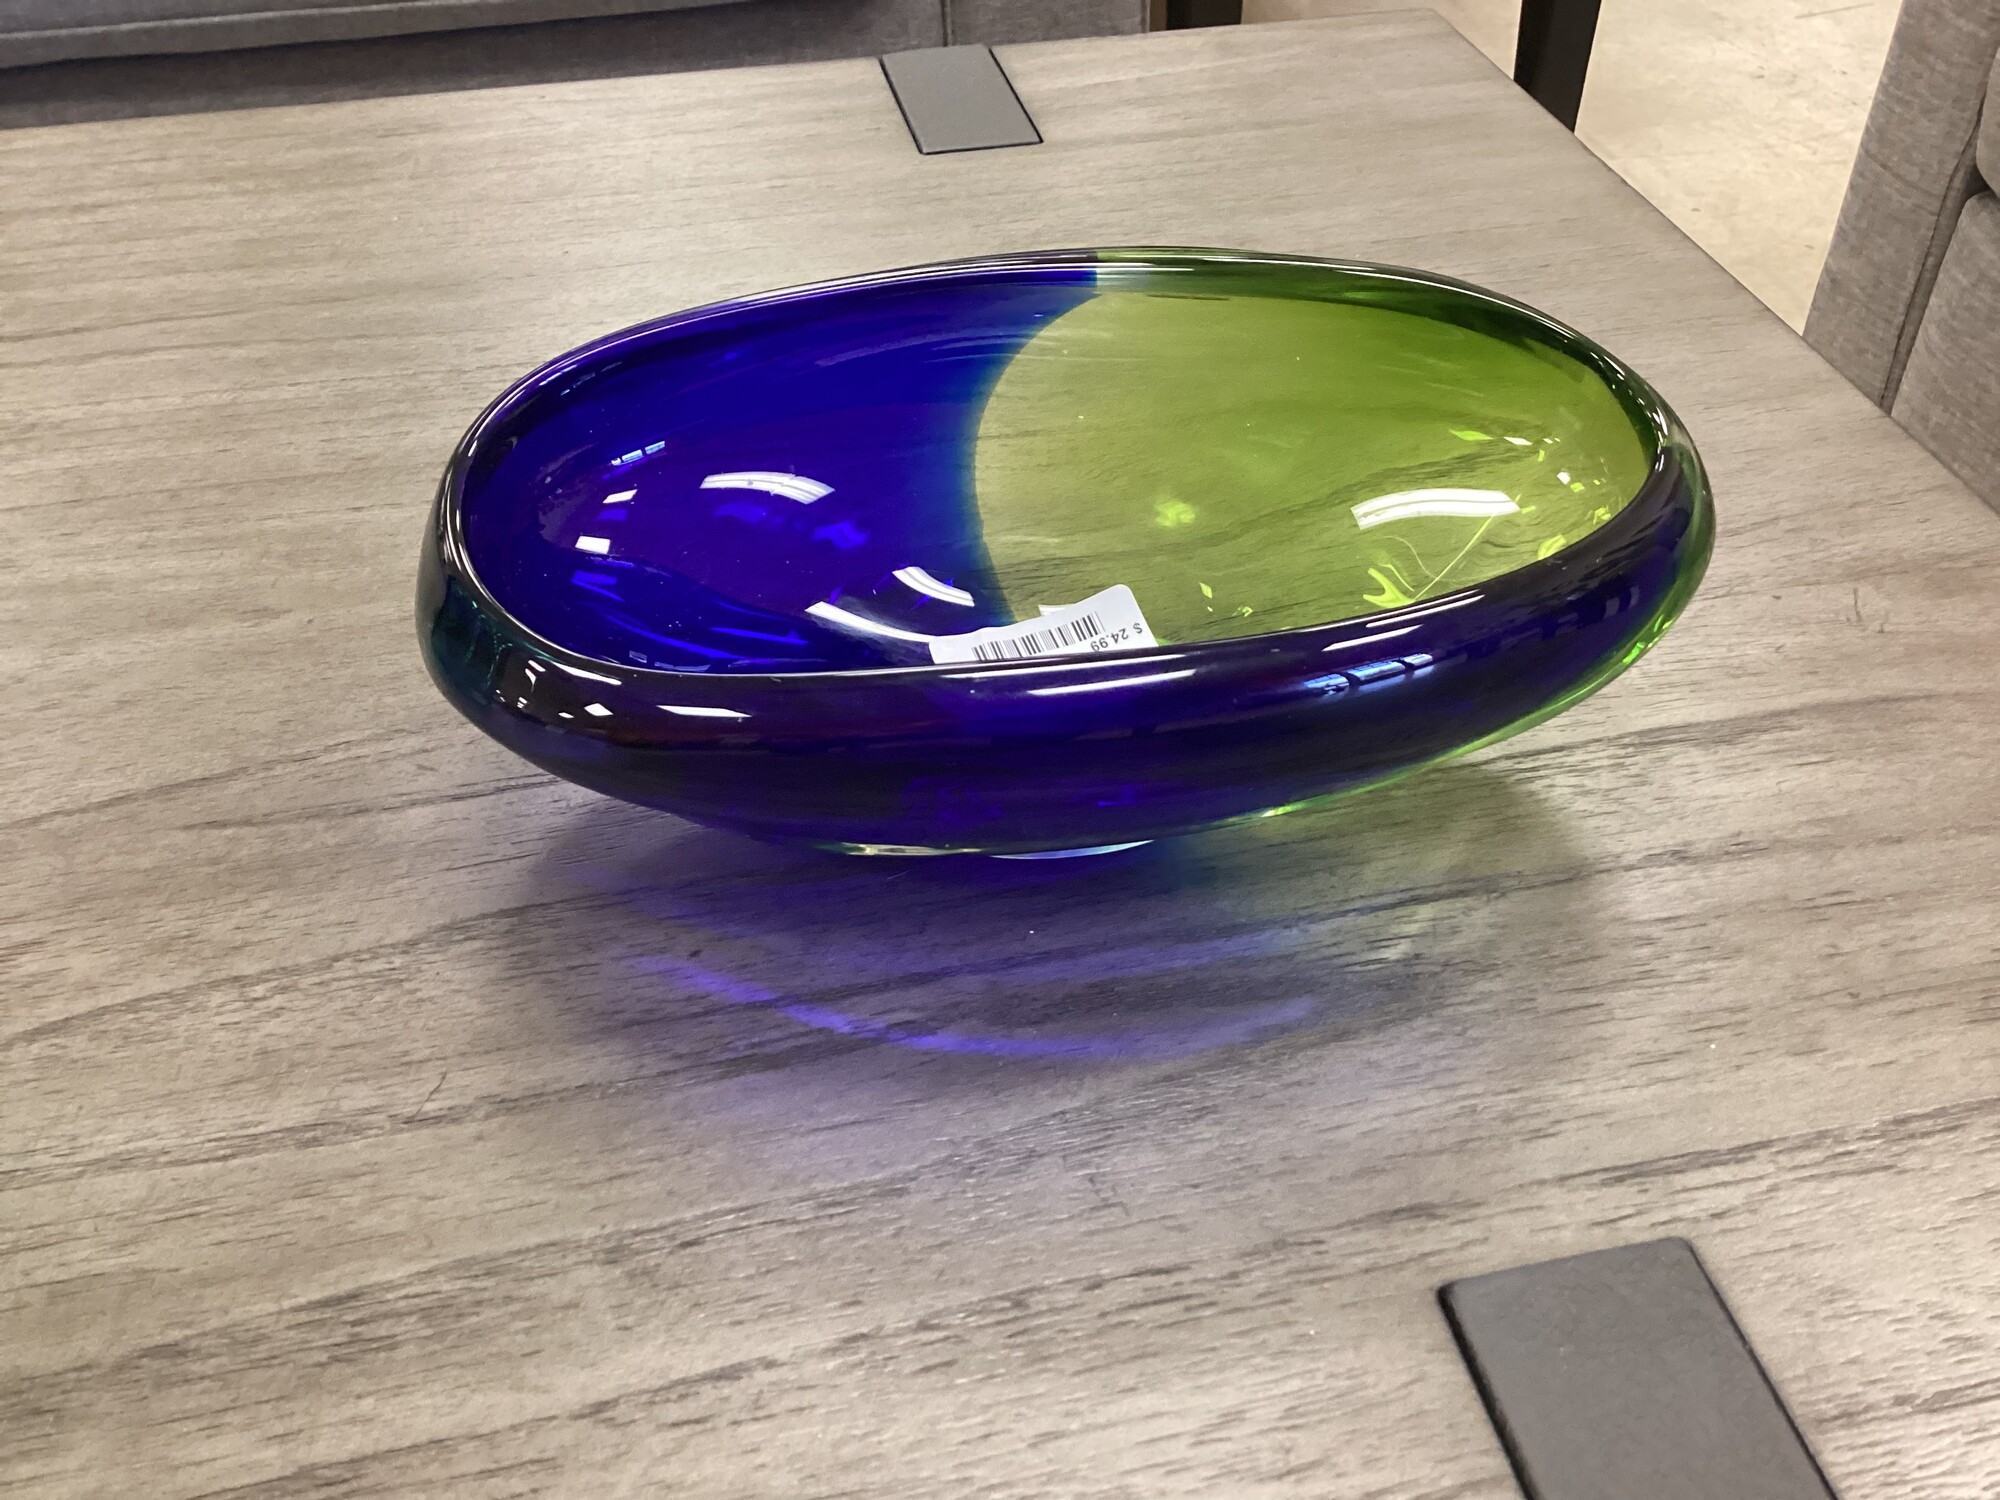 Royal Blue/Lime Bowl, R Blue, Long
12in wide x 7in deep x 5in tall